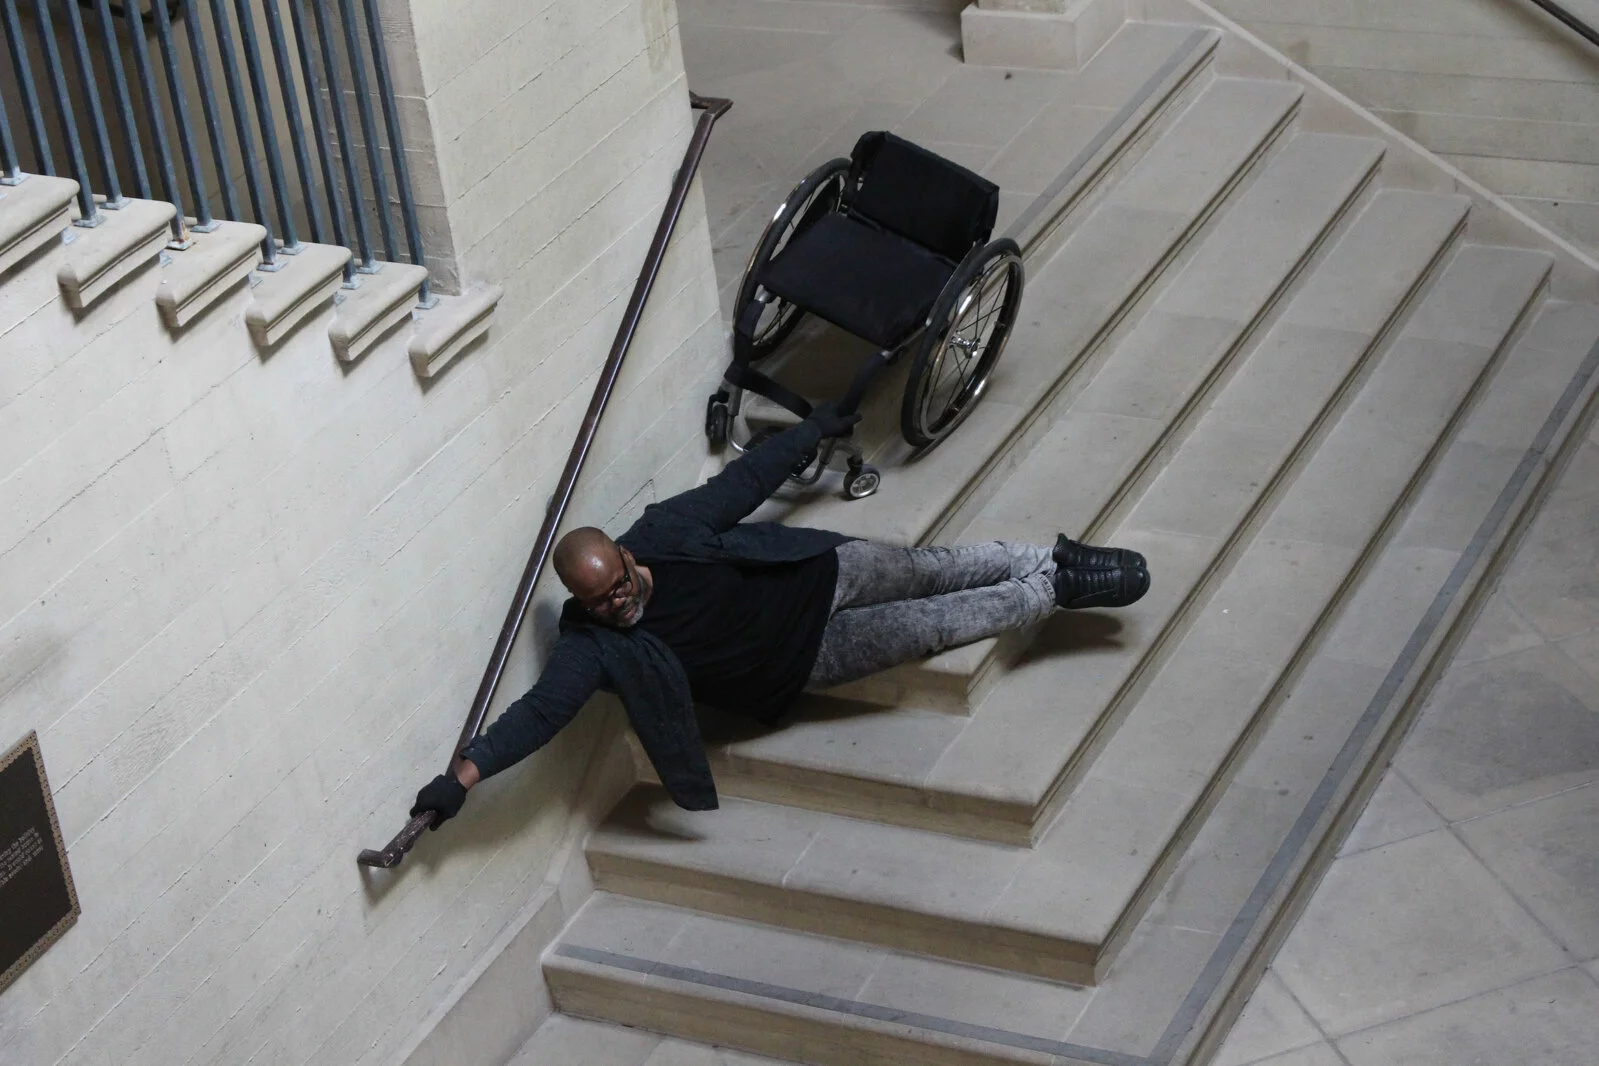 Barak holding onto his wheelchair while on stairs for A-Series of Movements.